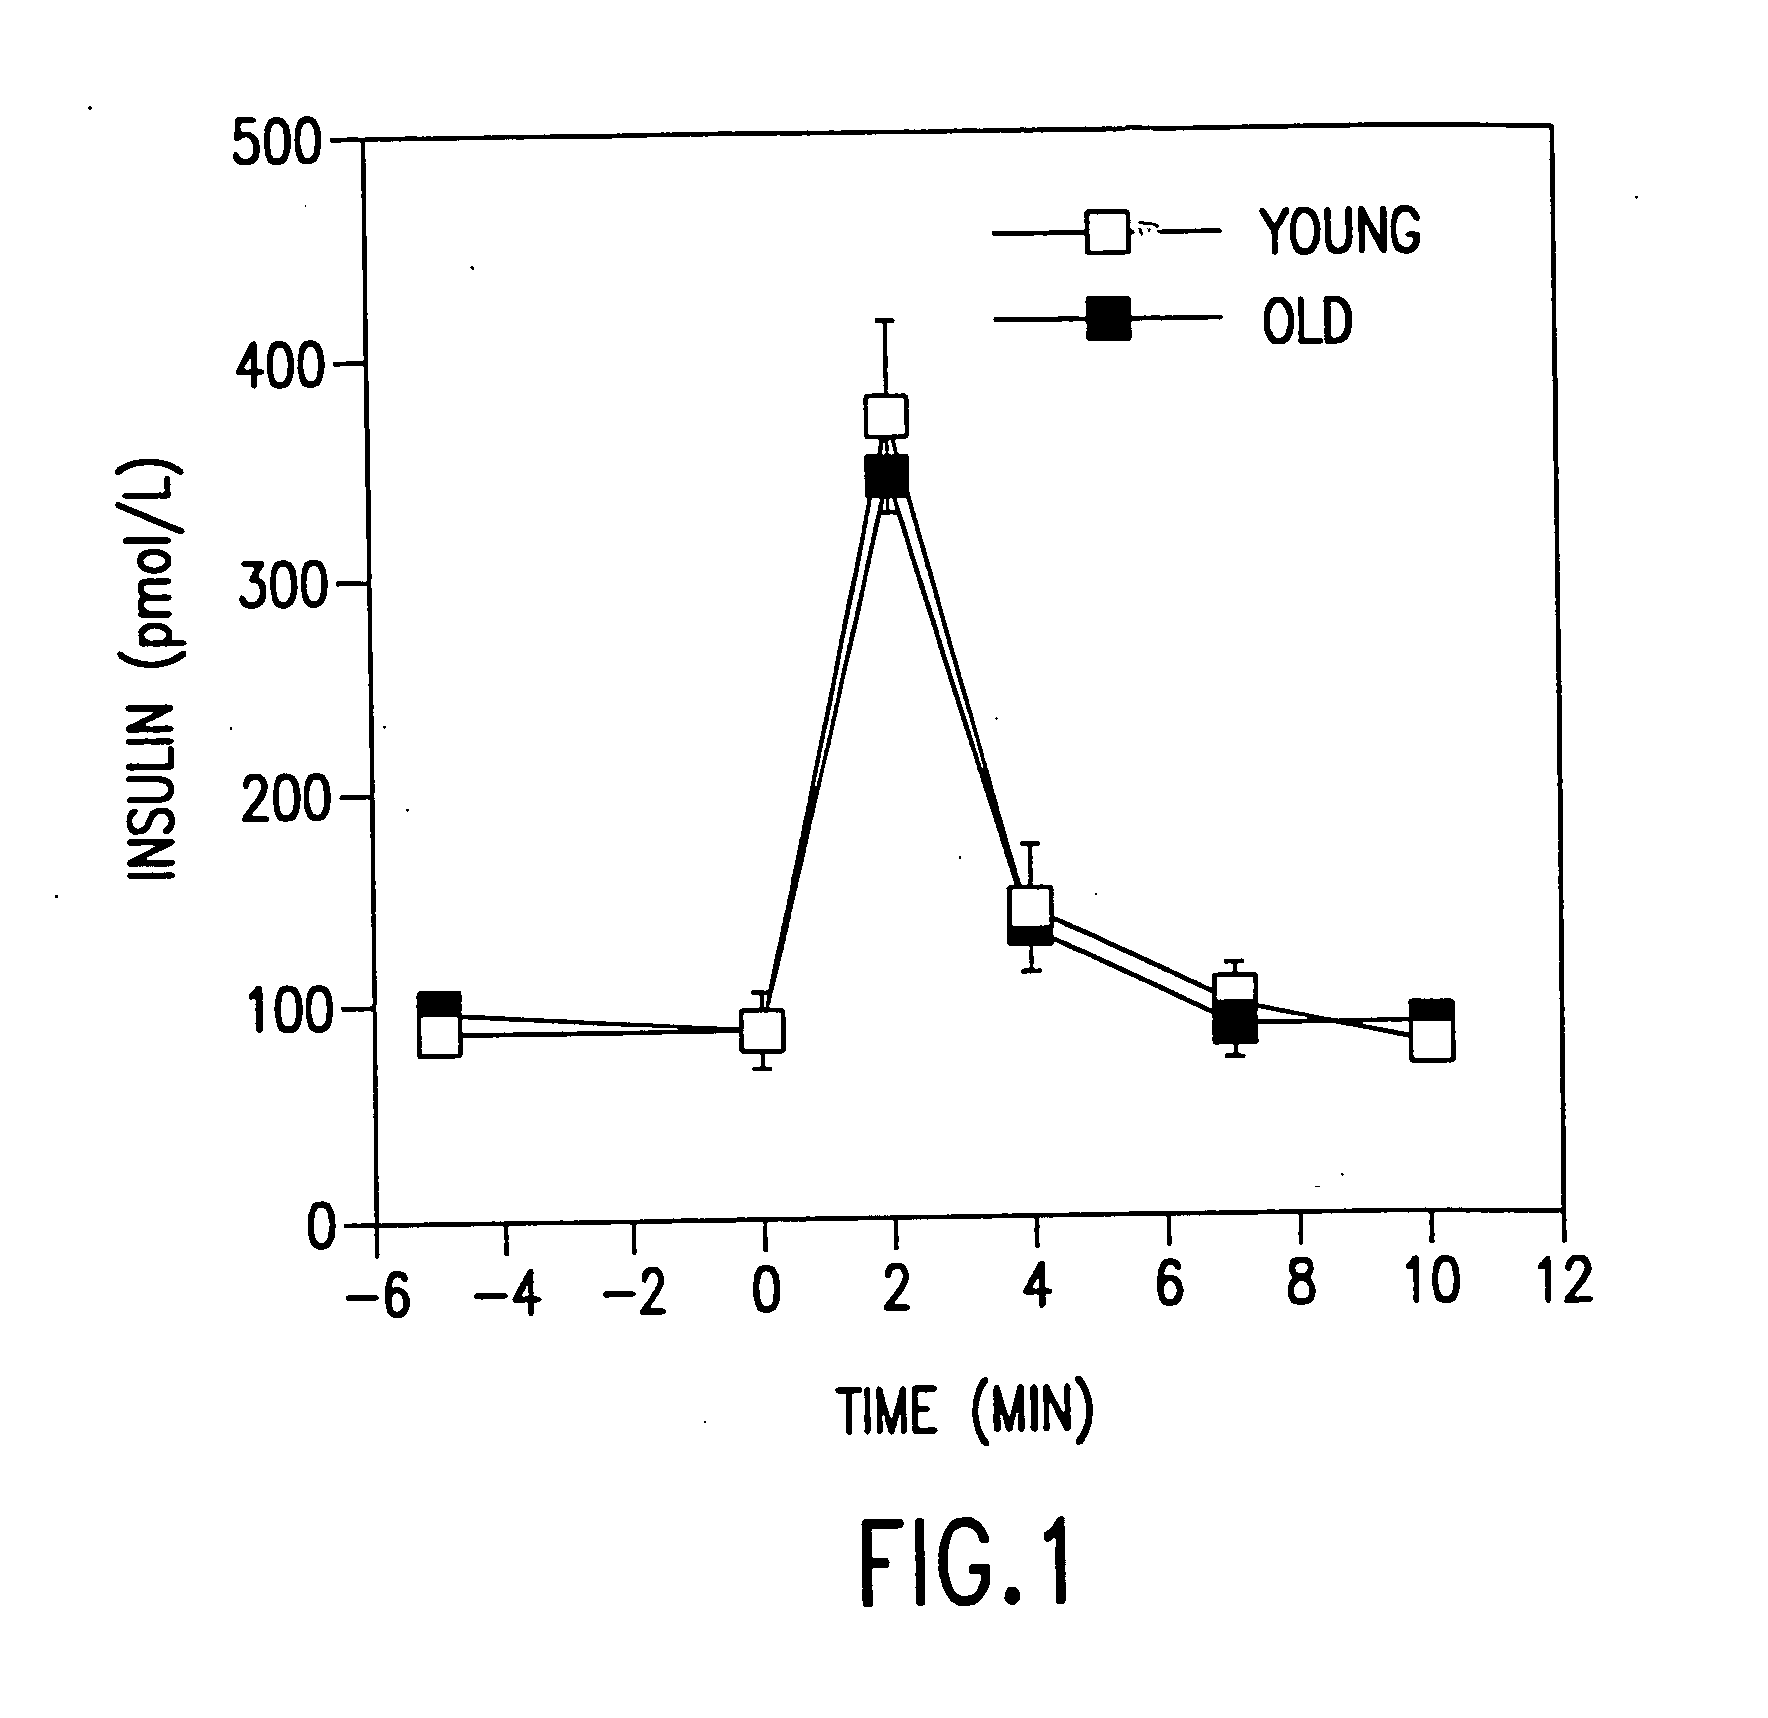 Differentiation of non-insulin producing cells into insulin producing cells by GLP-1 or exendin-4 and uses thereof